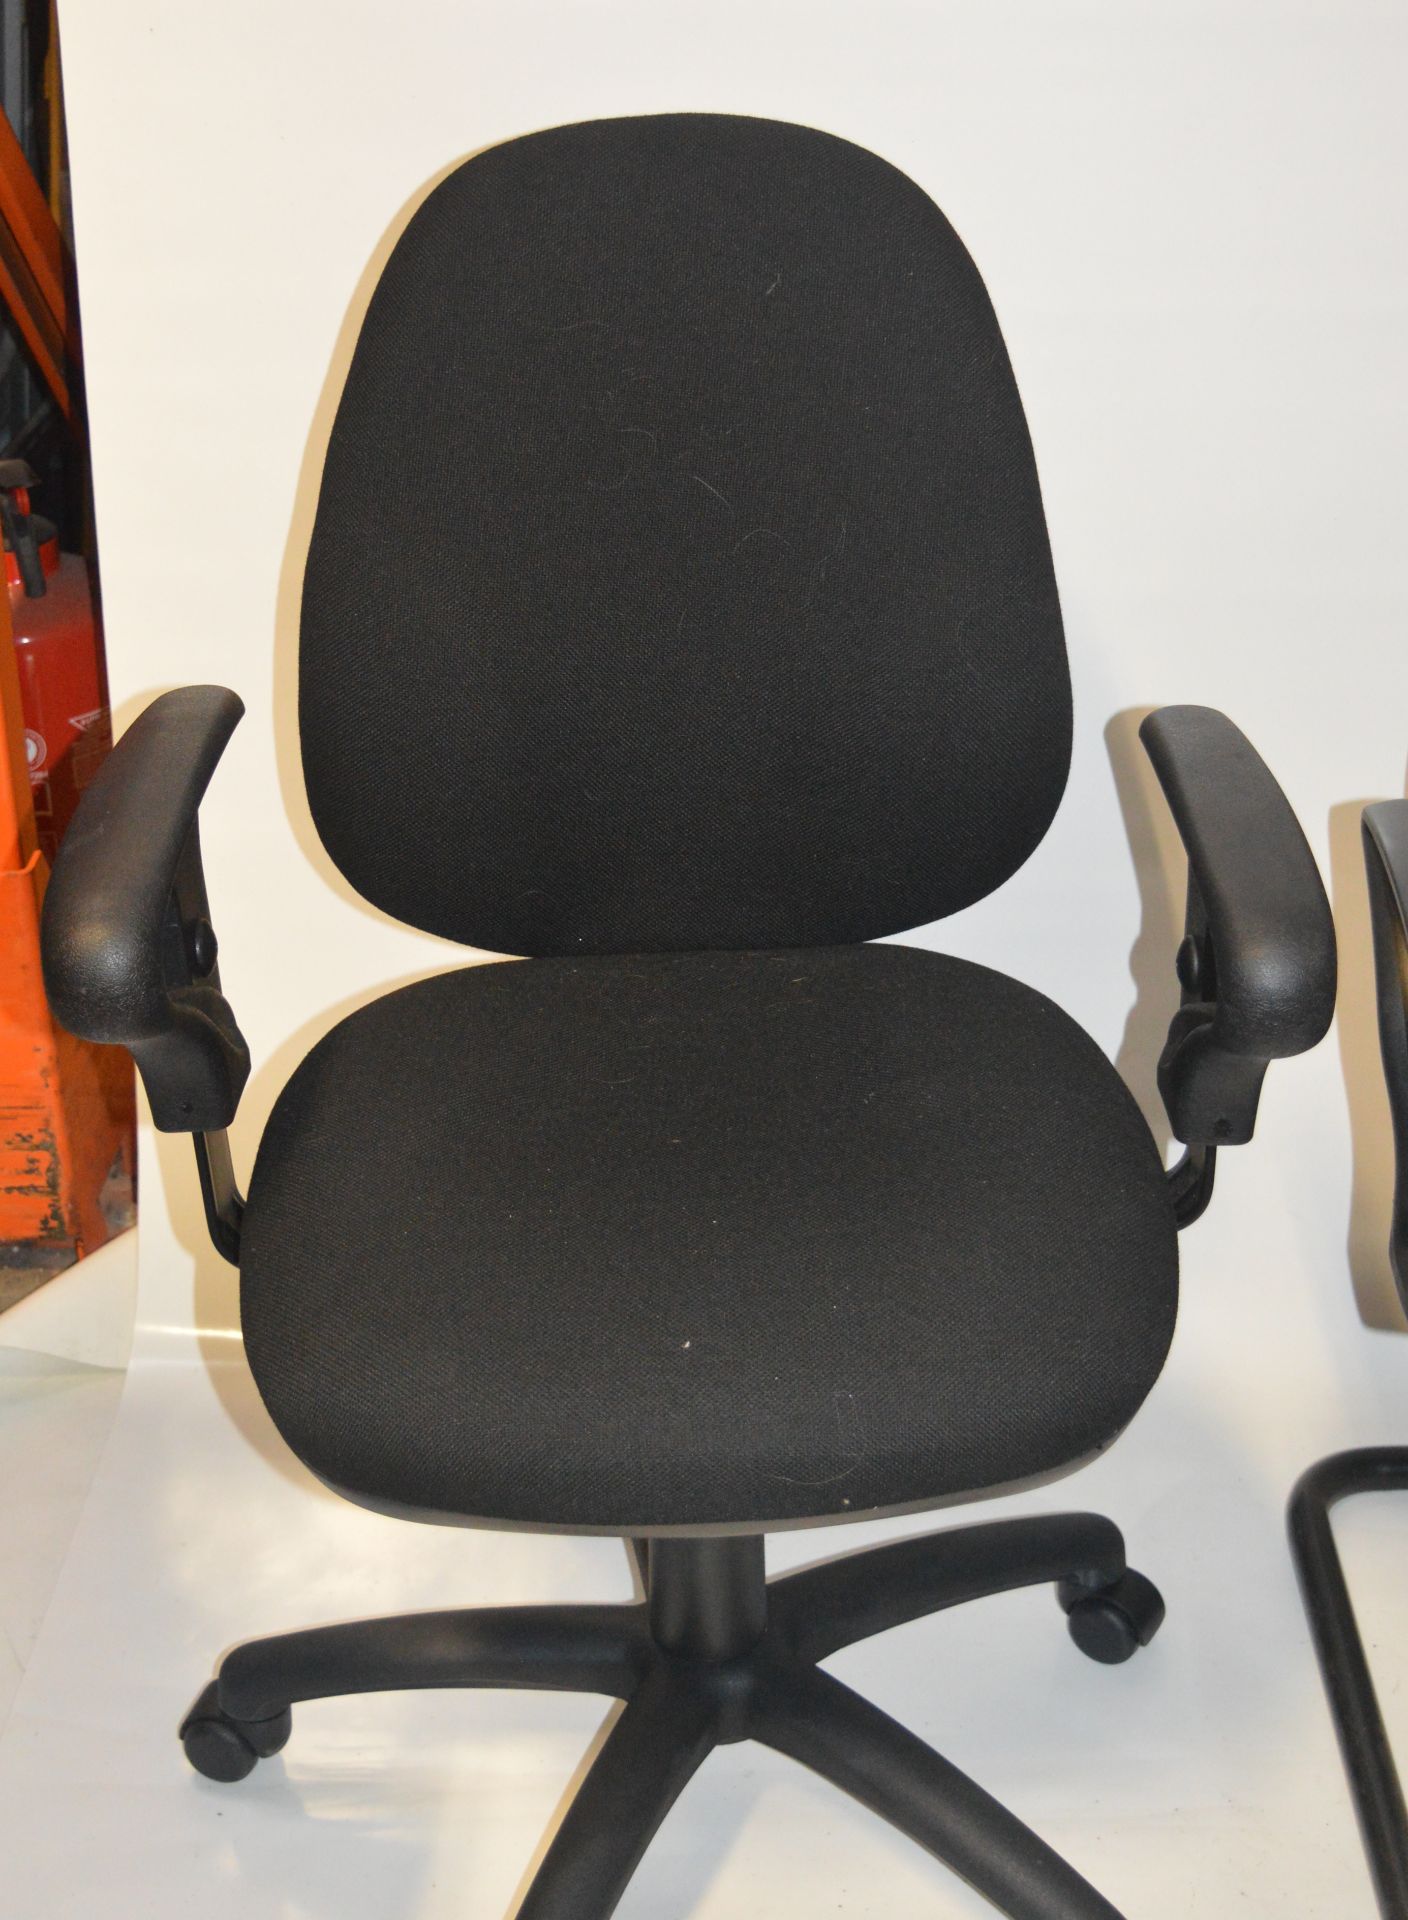 3 x Various Black Office Chairs - CL011 - Ref JP175 - Removed From Office Environment - Location: - Image 4 of 5